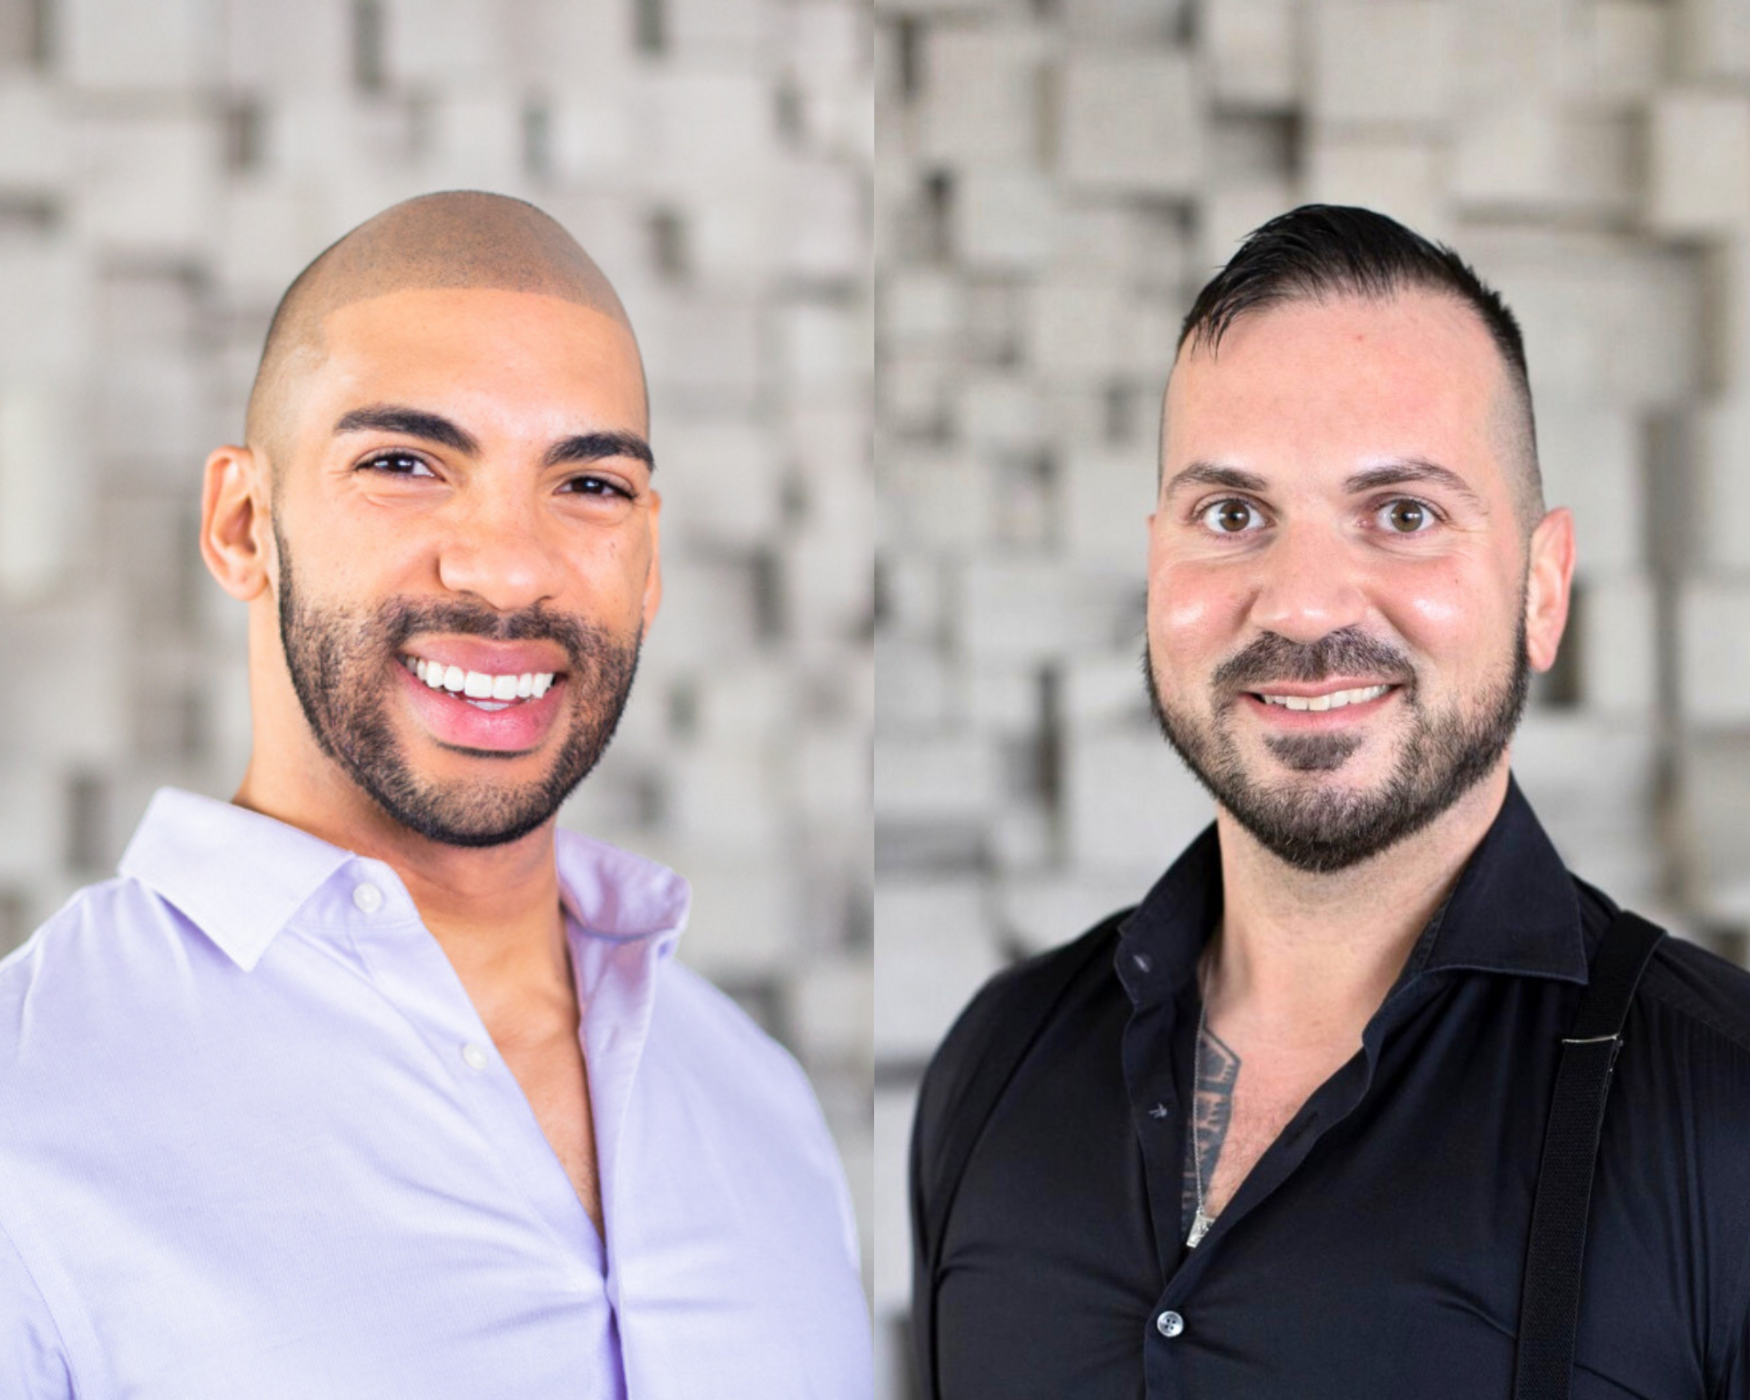 Headshots of Dr. Jordan Goodridge and Dr. Gianni R. Lorello in front of the blurred grey brick wall.